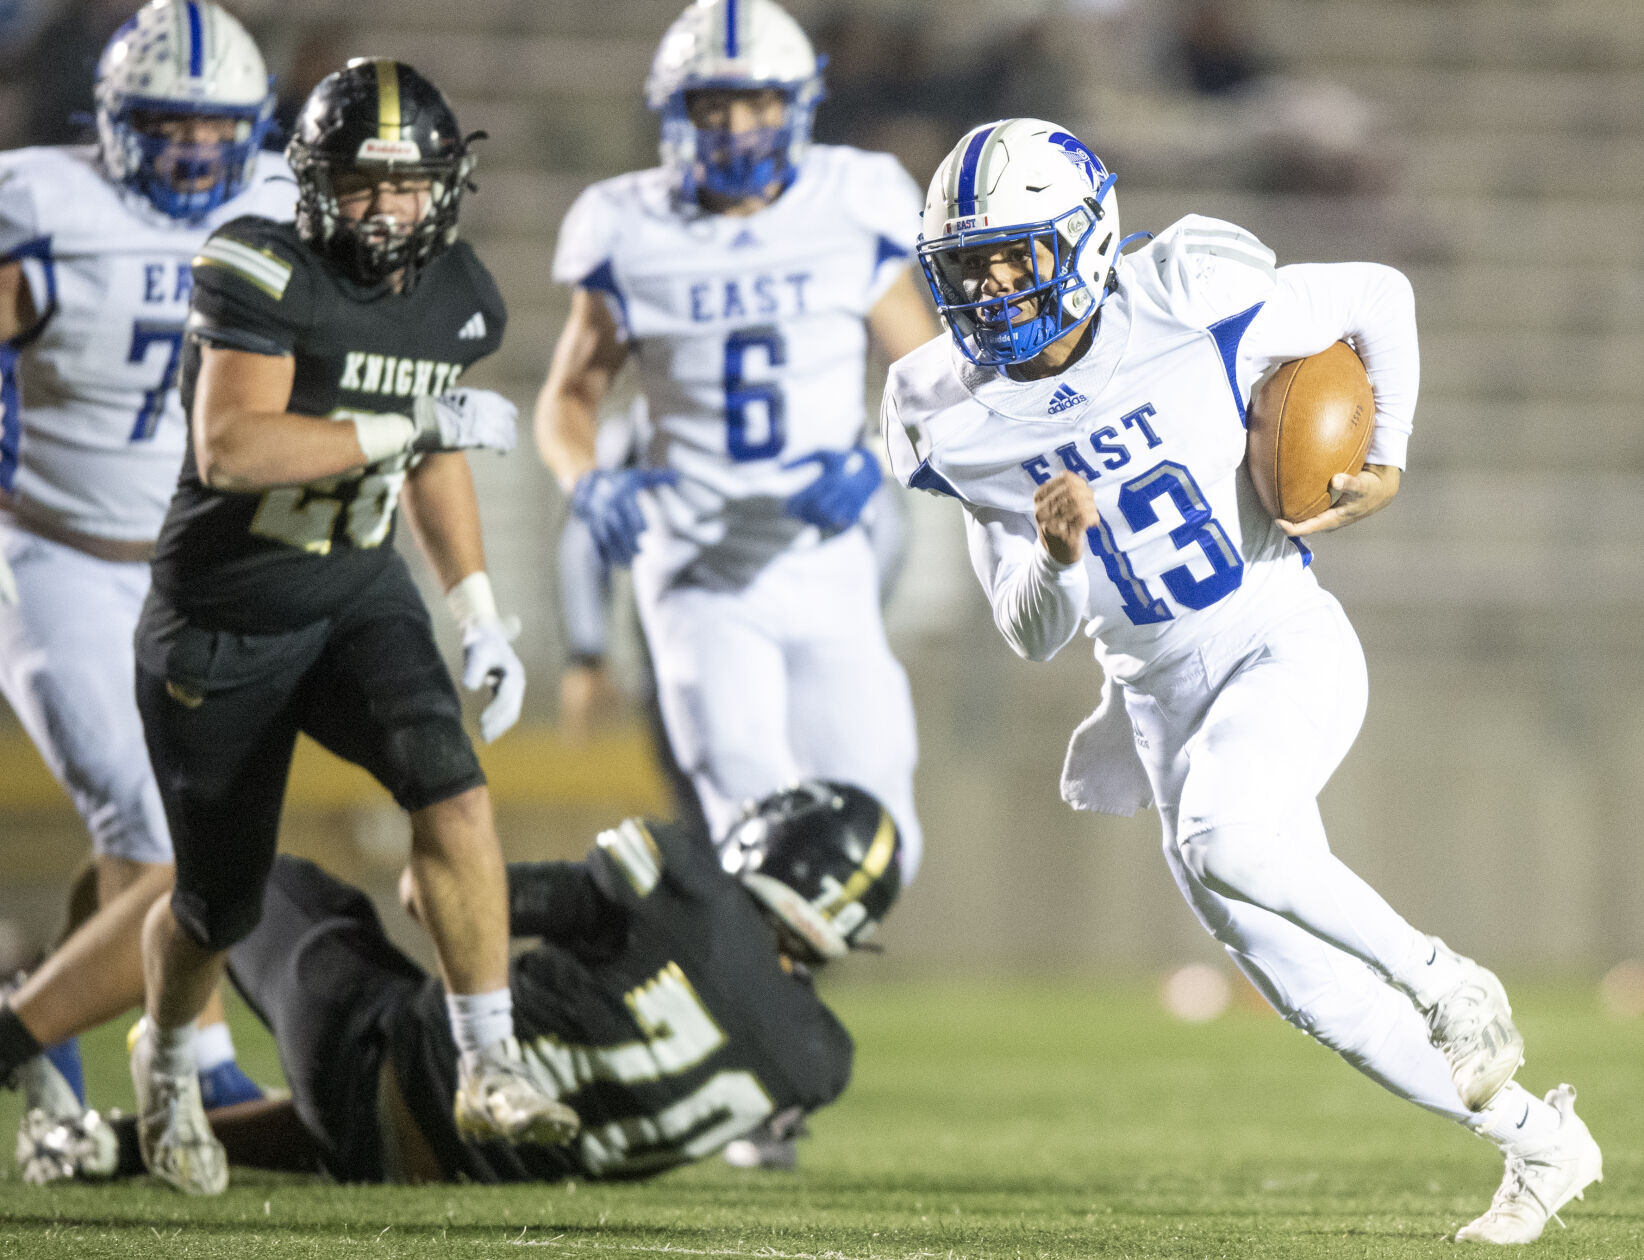 Jeter Worthley’s rushing performance propels Lincoln East to playoff victory